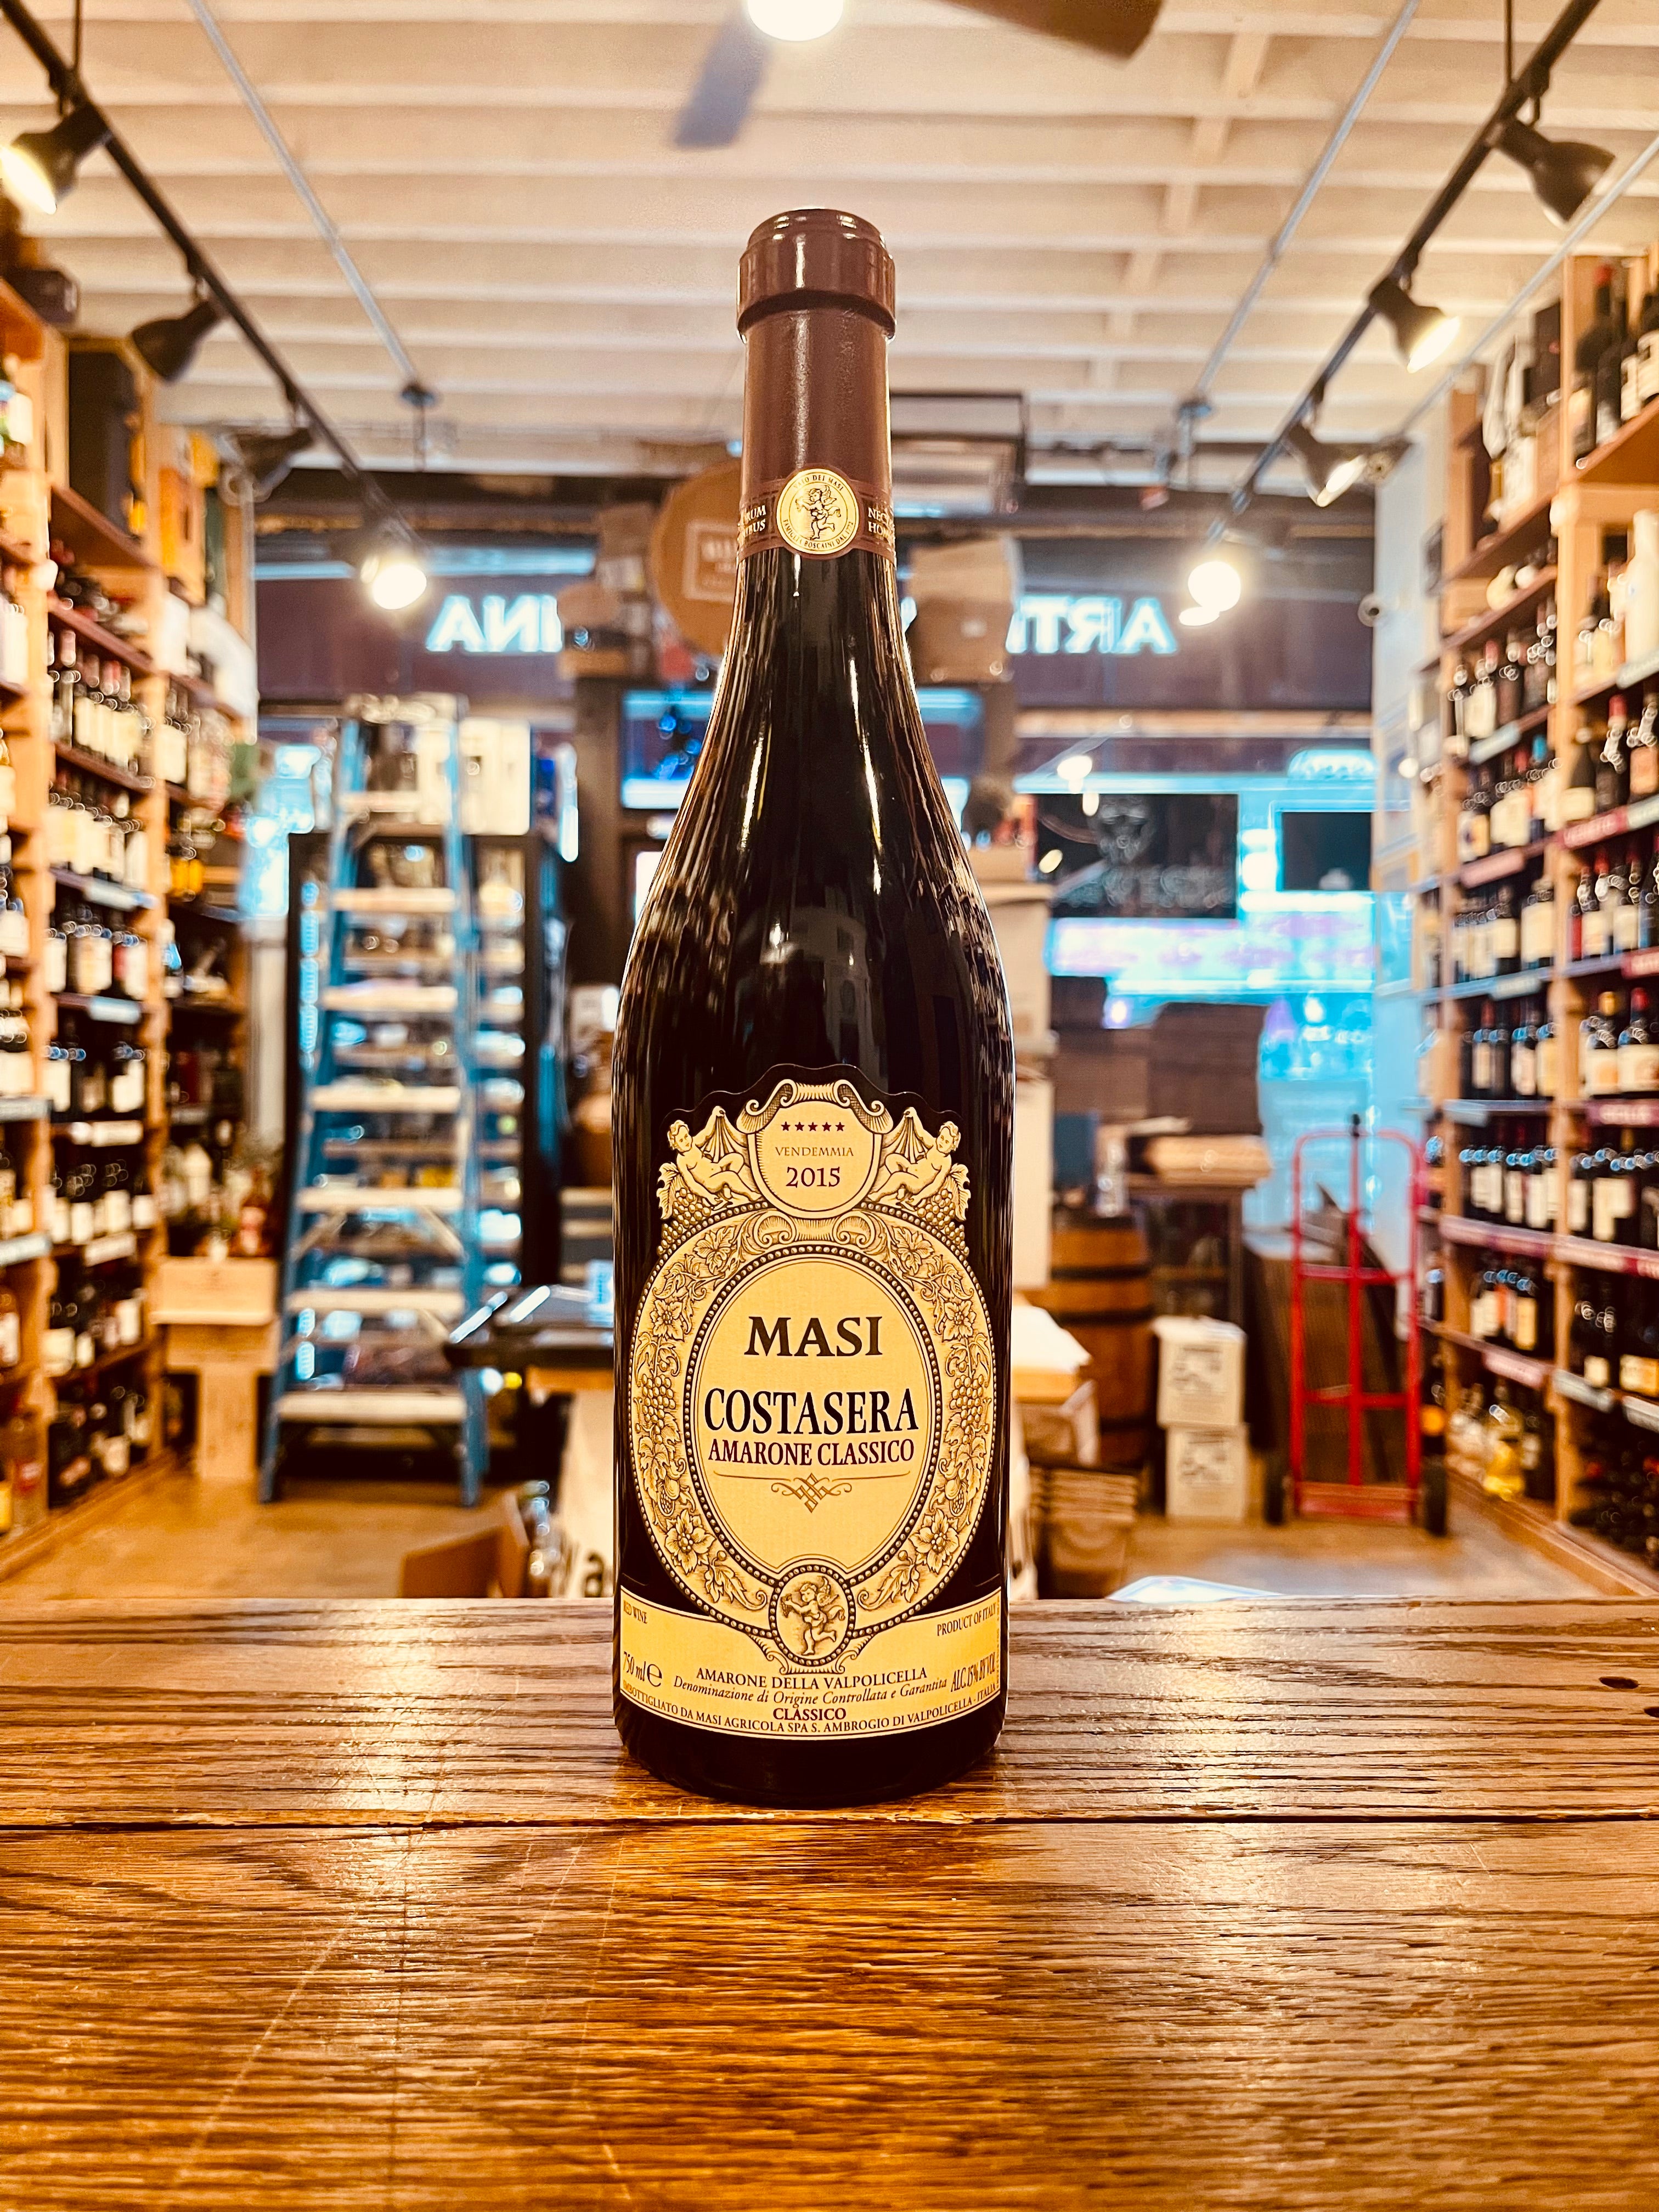 Masi Costasera Amarone Classico 750ml DOC 2015 a dark glass bottle with a beige label and maroon top